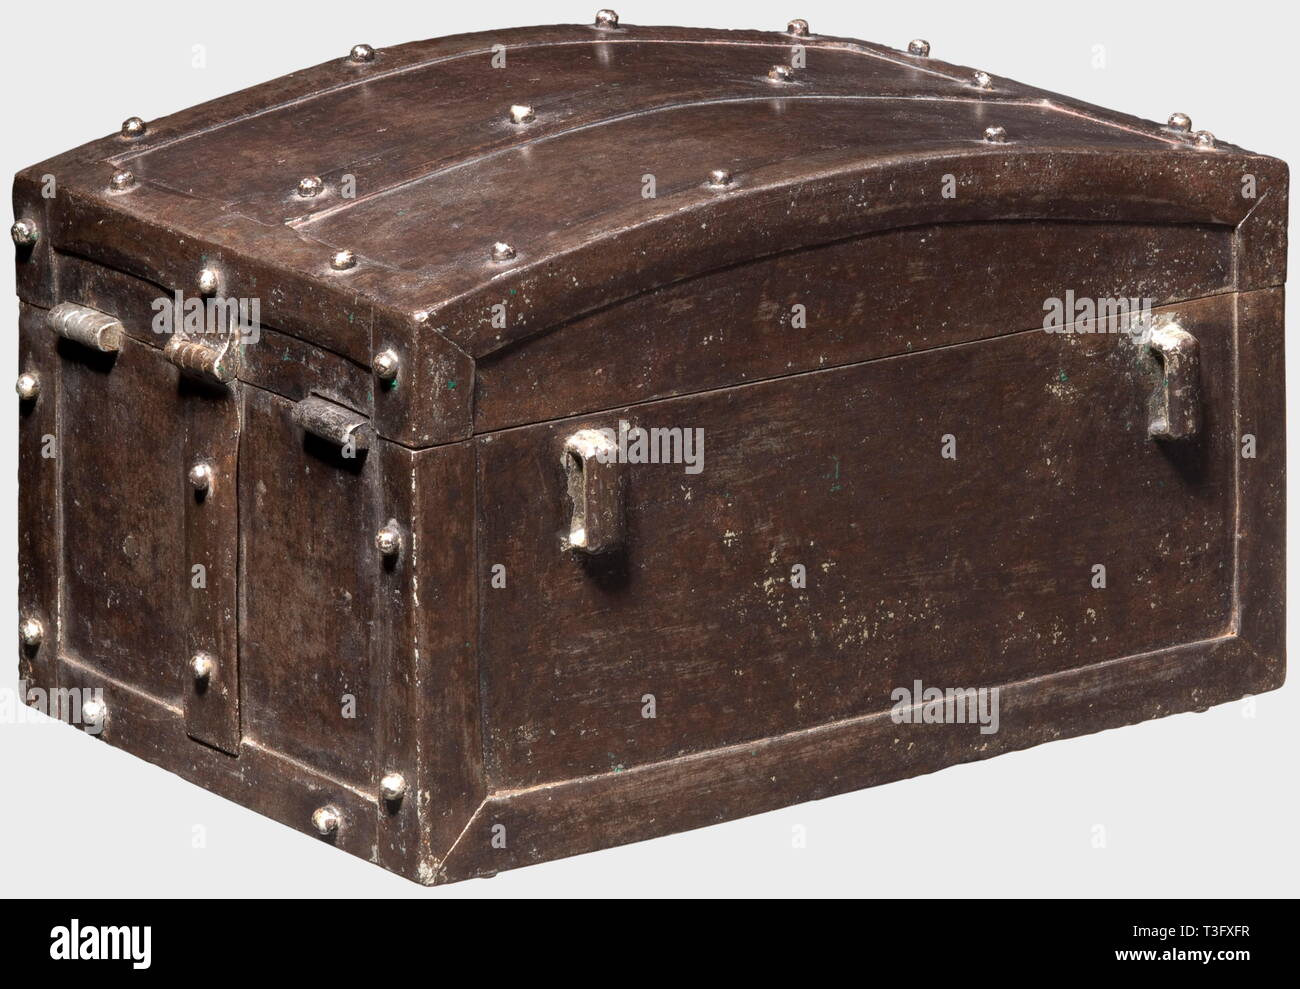 A French iron messenger casket, circa 1600 Blackened forged iron. Rectangular casket with reinforcement straps and cambered, hinged lid. Lock on the narrow side with a hasp and latching key hole cover. On both sides two fastening loops. The key of later date. Dimensions 26 x 17 x 15 cm. historic, historical, 17th century, handicrafts, handcraft, craft, object, objects, stills, clipping, clippings, cut out, cut-out, cut-outs, storage, box, boxes, cabinet, chest, cabinets, chests, piece of furniture, pieces of furniture, furnishings, Additional-Rights-Clearance-Info-Not-Available Stock Photo